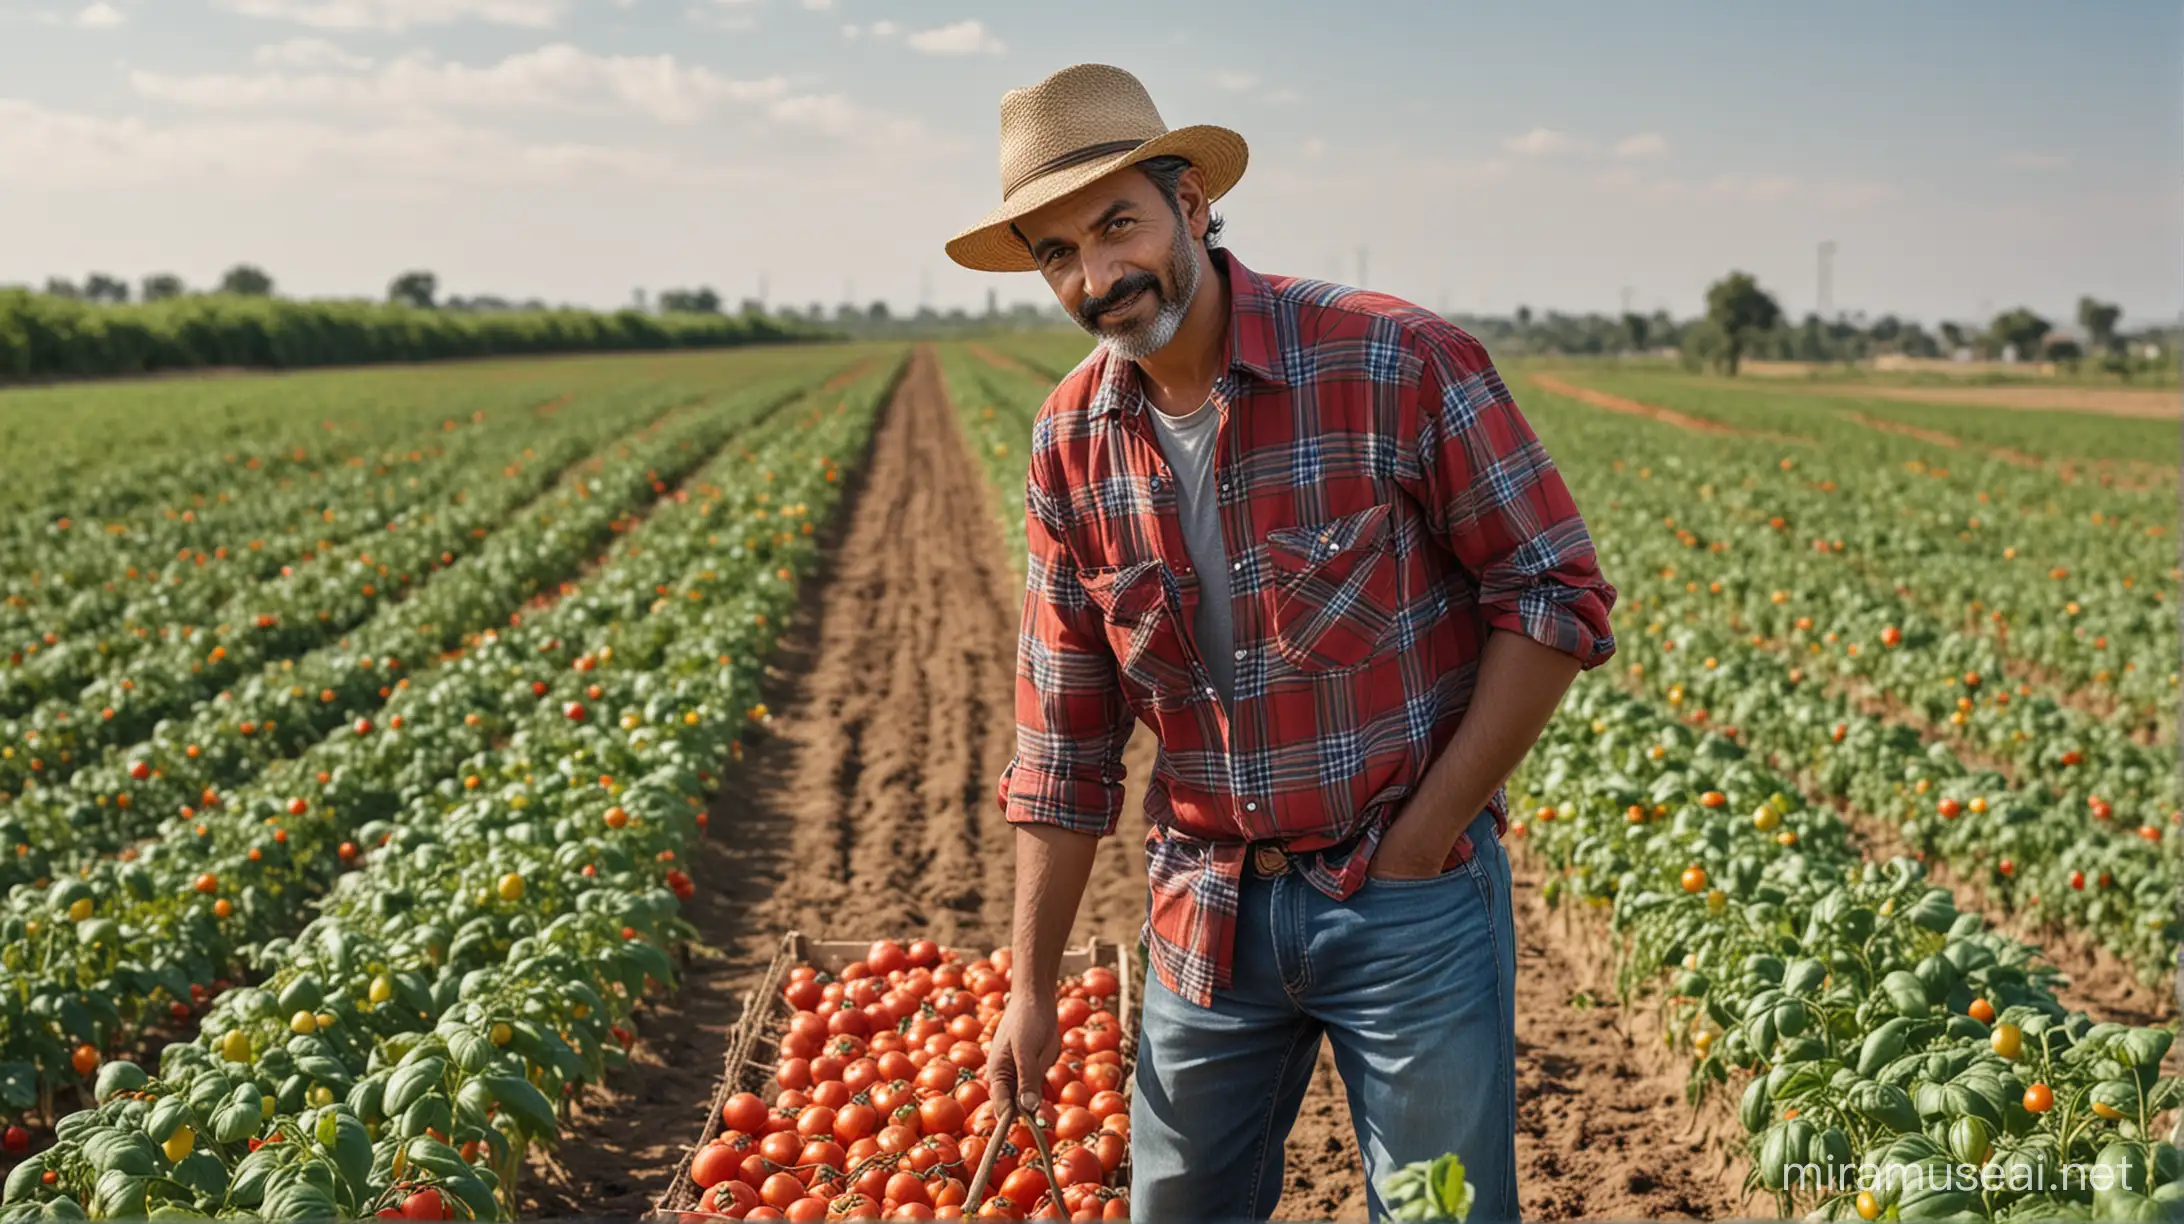 Create an image of a realistic farmer in a field, showcasing the contrast between two types of tomato harvests using regenerative farming techniques. The farmer, a middle-aged South Asian man, is wearing a plaid shirt, denim jeans, and a straw hat. He stands proudly in the center, with organic fertilizer near him. On his left, display a lush, vibrant section of the field with premium quality, bright red tomatoes, symbolizing high yield and income benefits. On his right, illustrate a neglected part of the field with poor-quality, wilted tomatoes. The background should feature a clear sky and the hint of a digital irrigation system, emphasizing the impact of technology on agricultural efficiency.